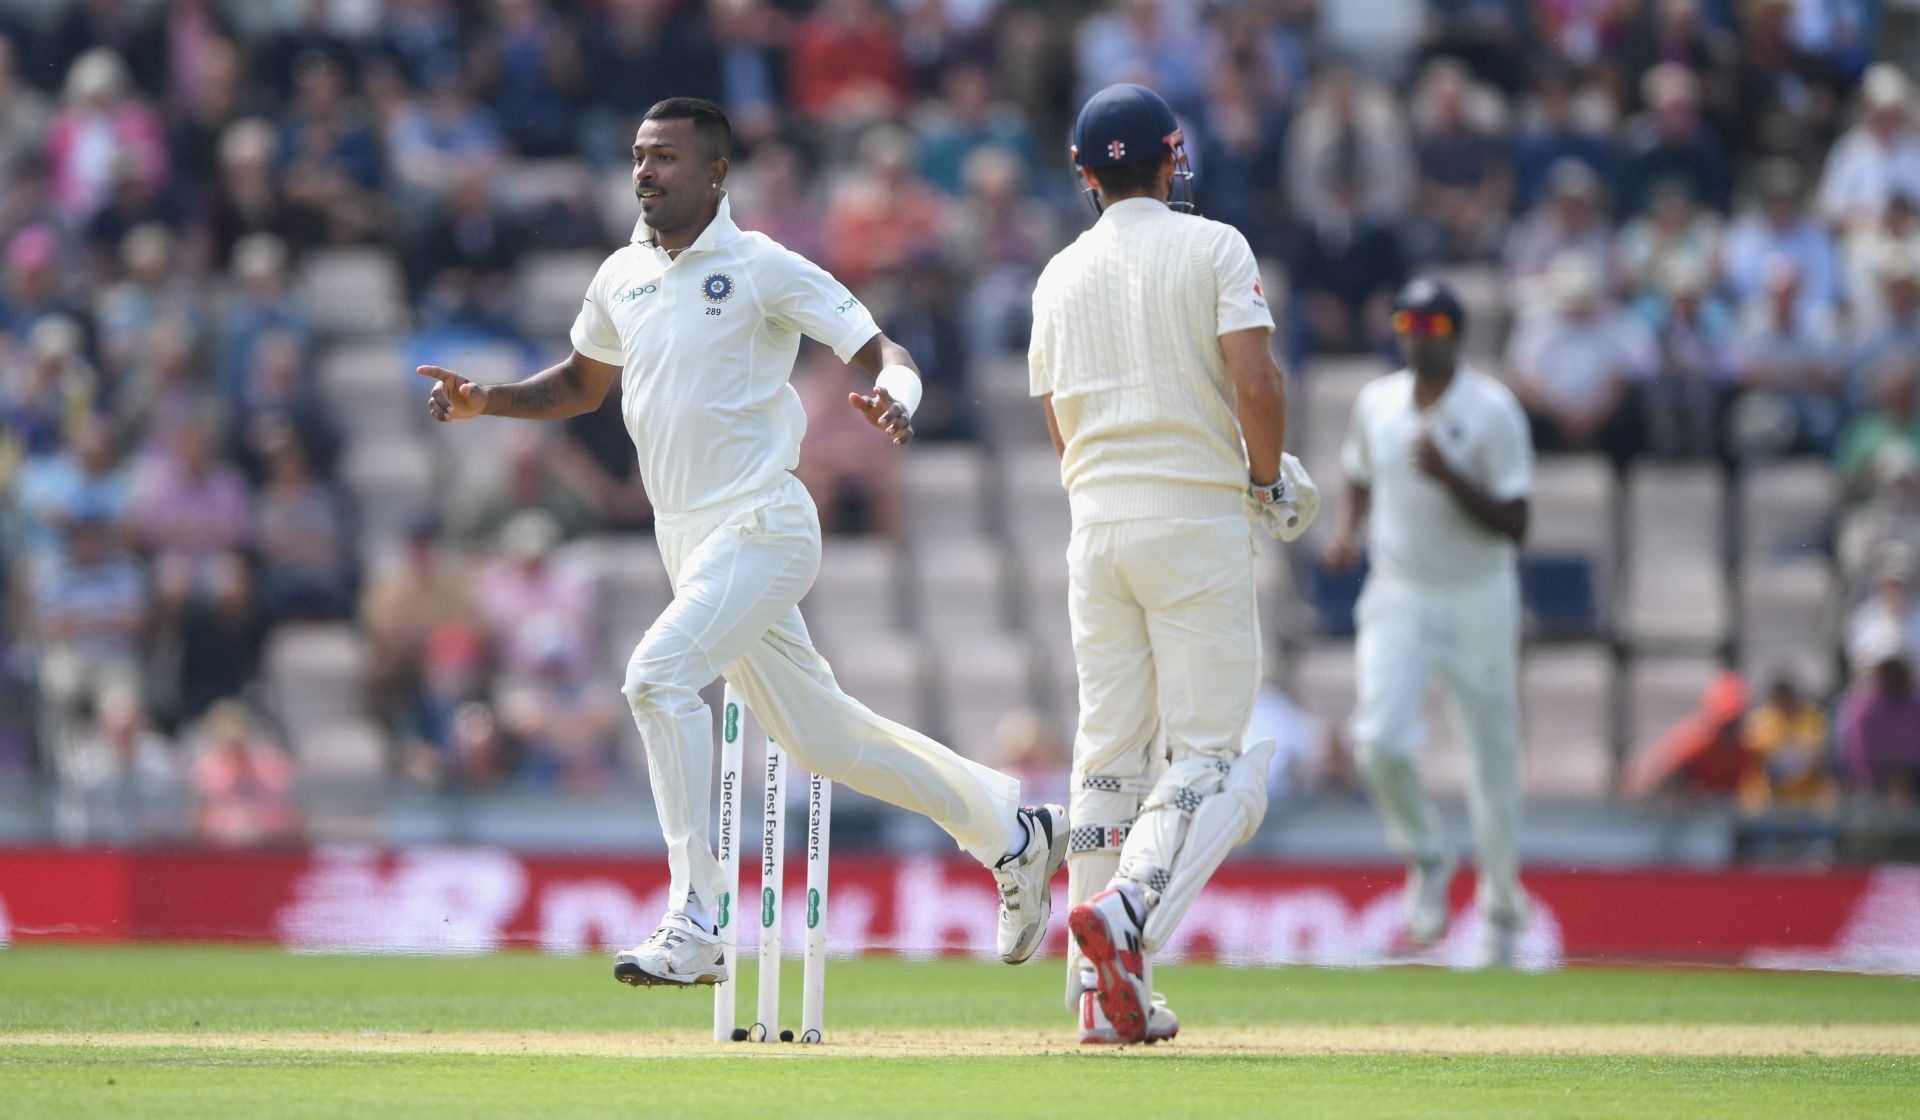 Hardik Pandya celebrates after dismissing Alastair Cook during the 2018 England tour. (Pic: Getty Images)